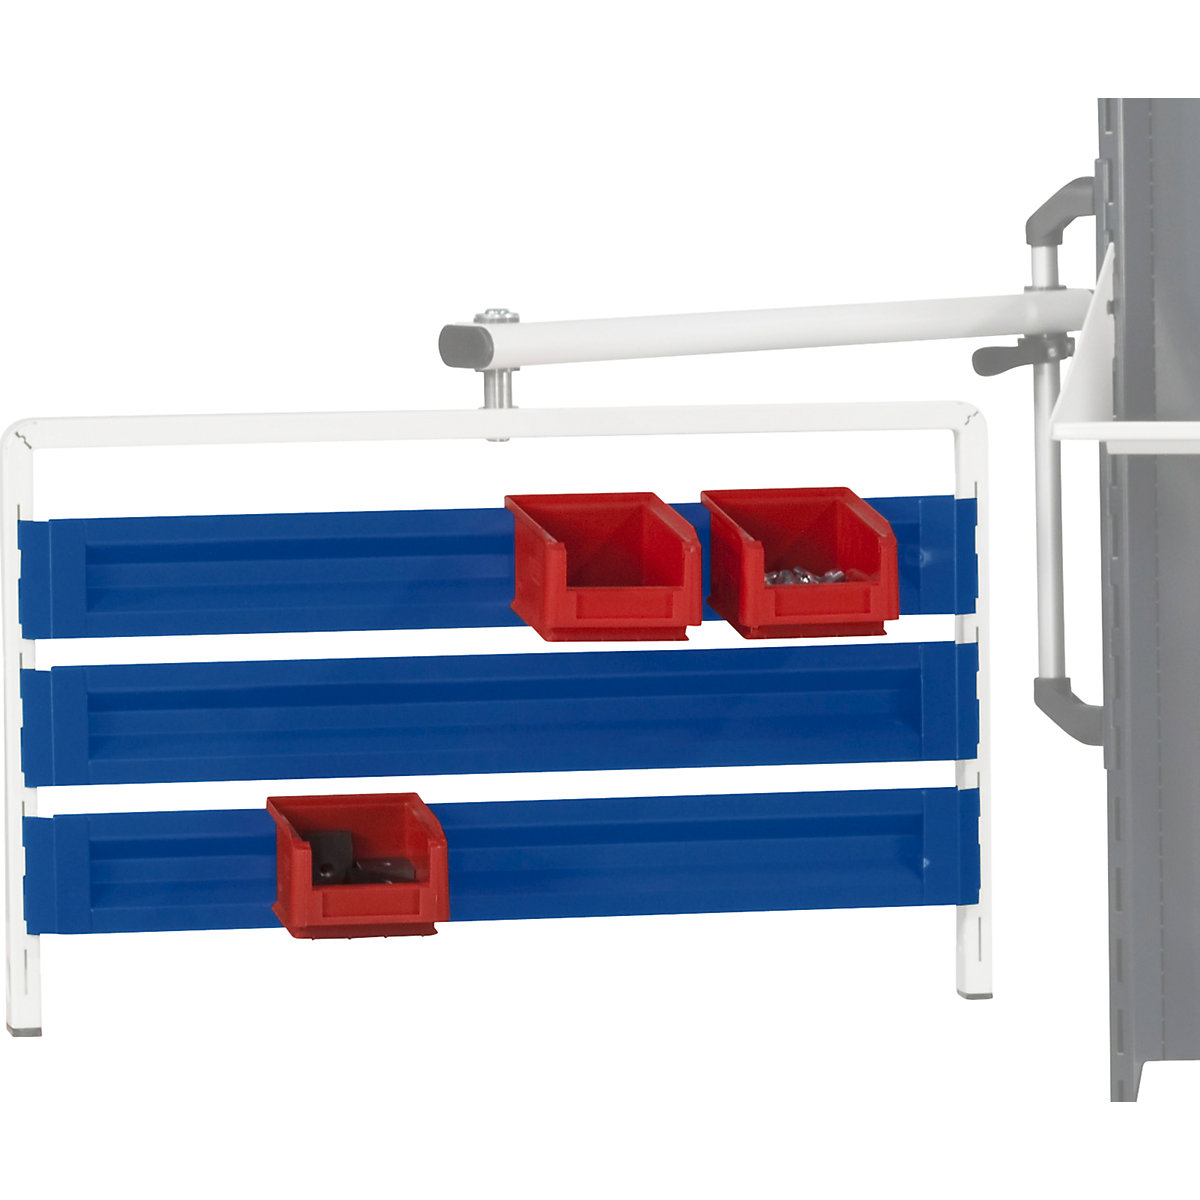 Suspension rail for open fronted storage bins – ANKE